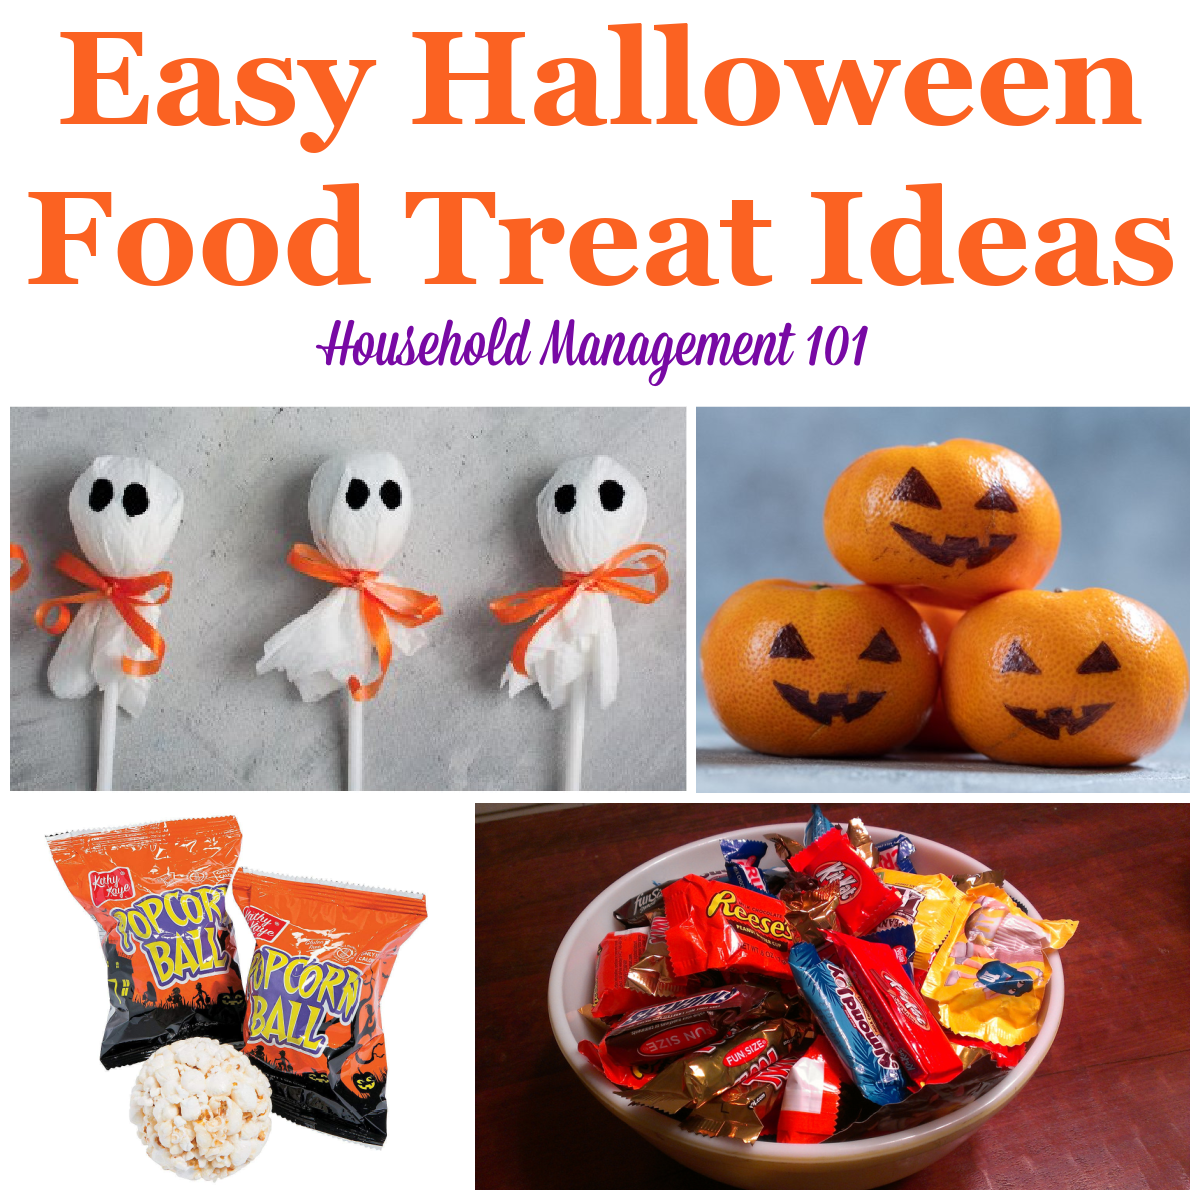 Here are easy Halloween food treat ideas for trick or treaters, so that you can please the kids coming to your door without a lot of work on your part {on Household Management 101}